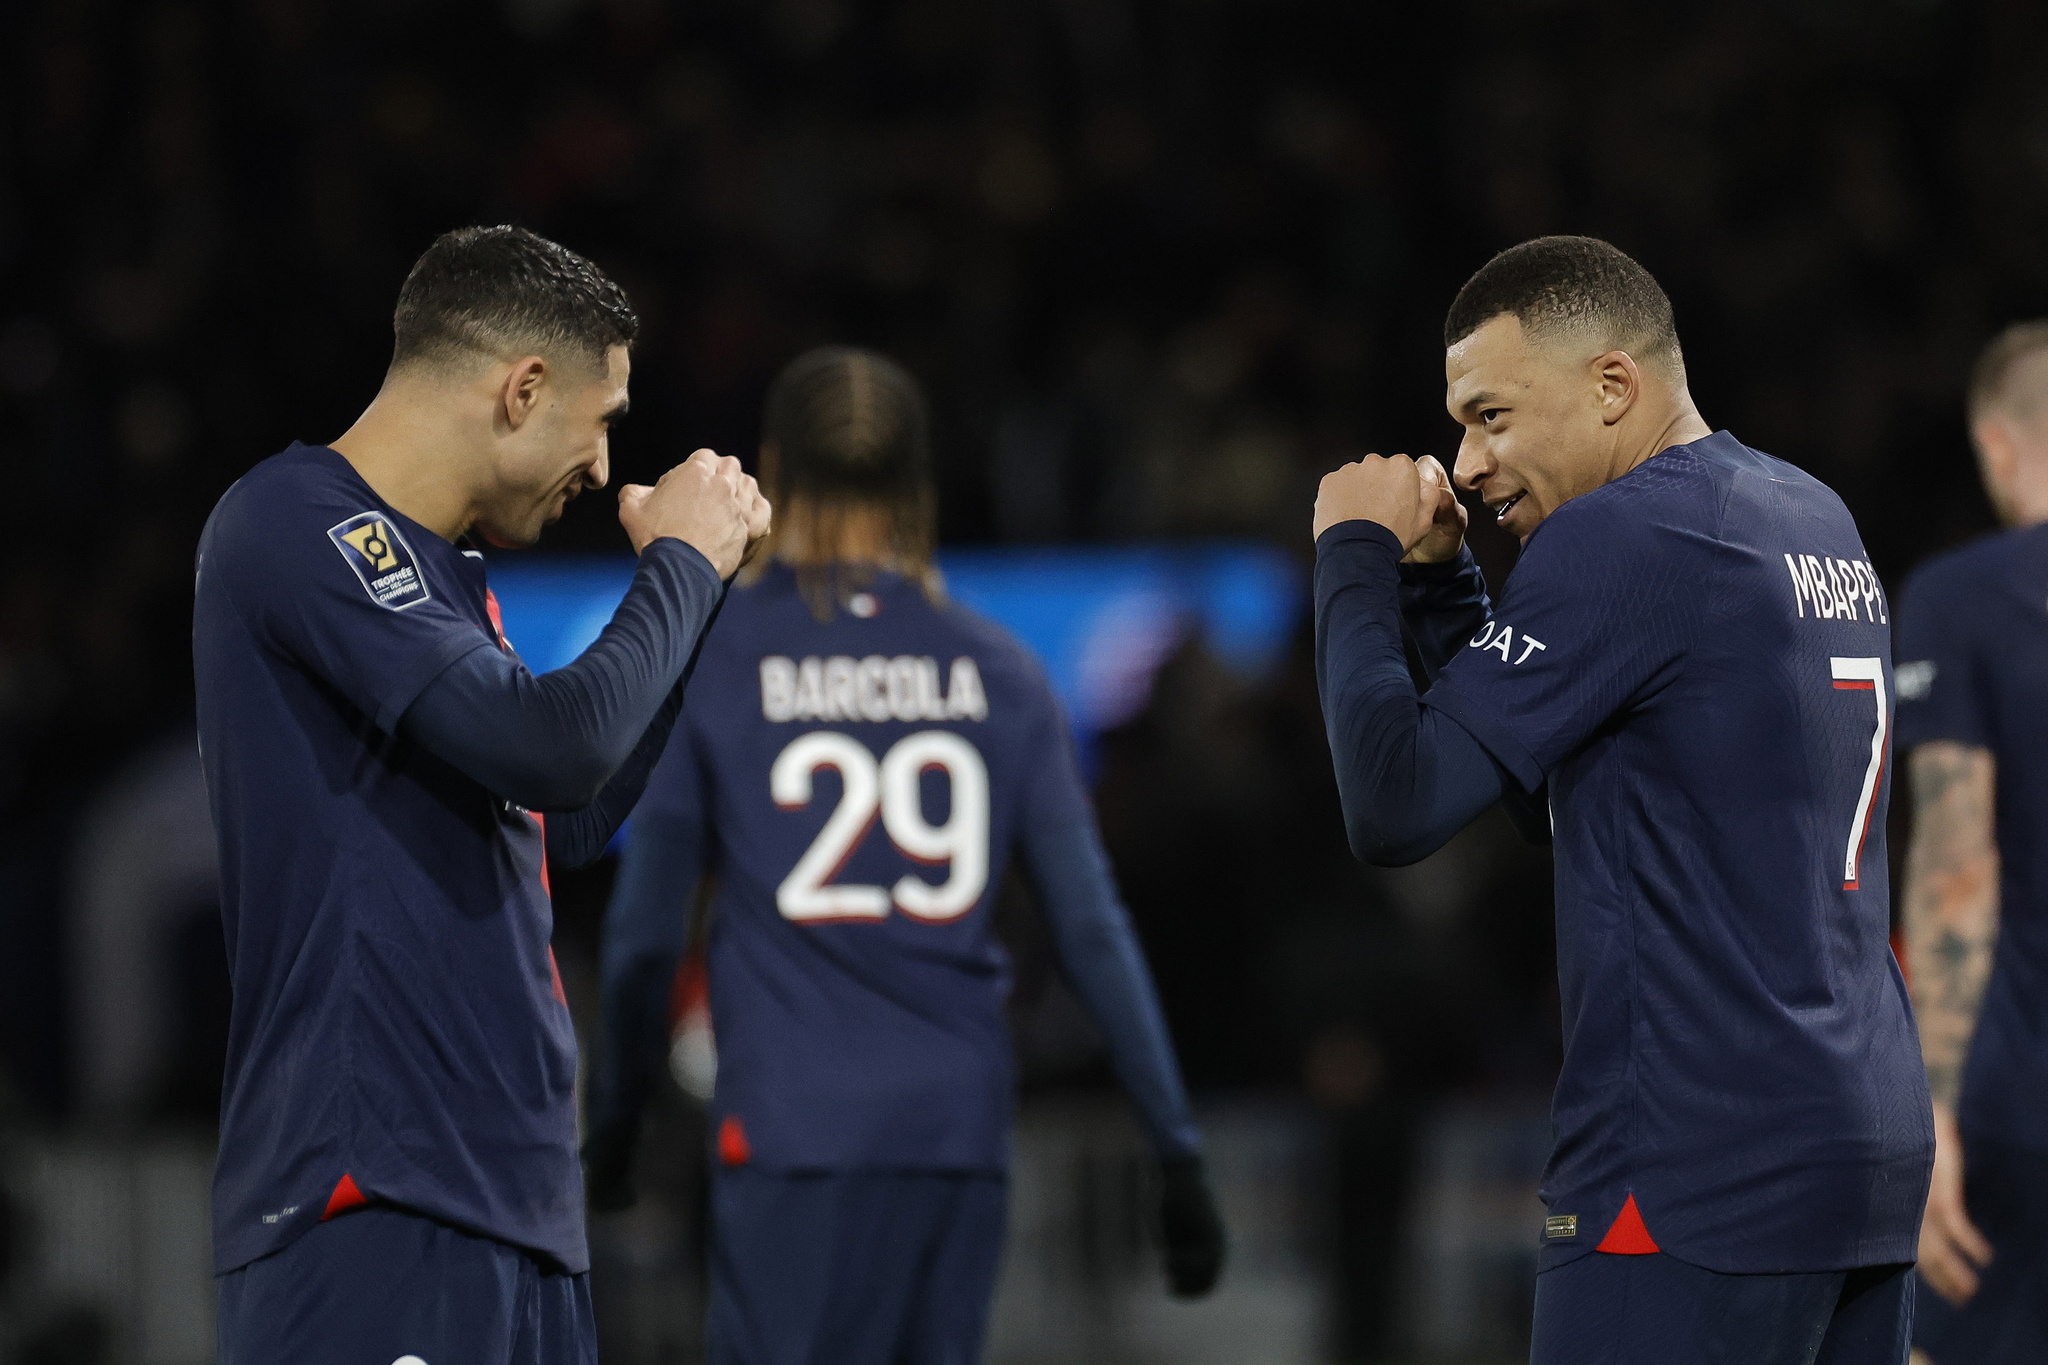 PSGs Kylian Mbappe (R) celebrates with teammate Achraf Hakimi (L) after scoring